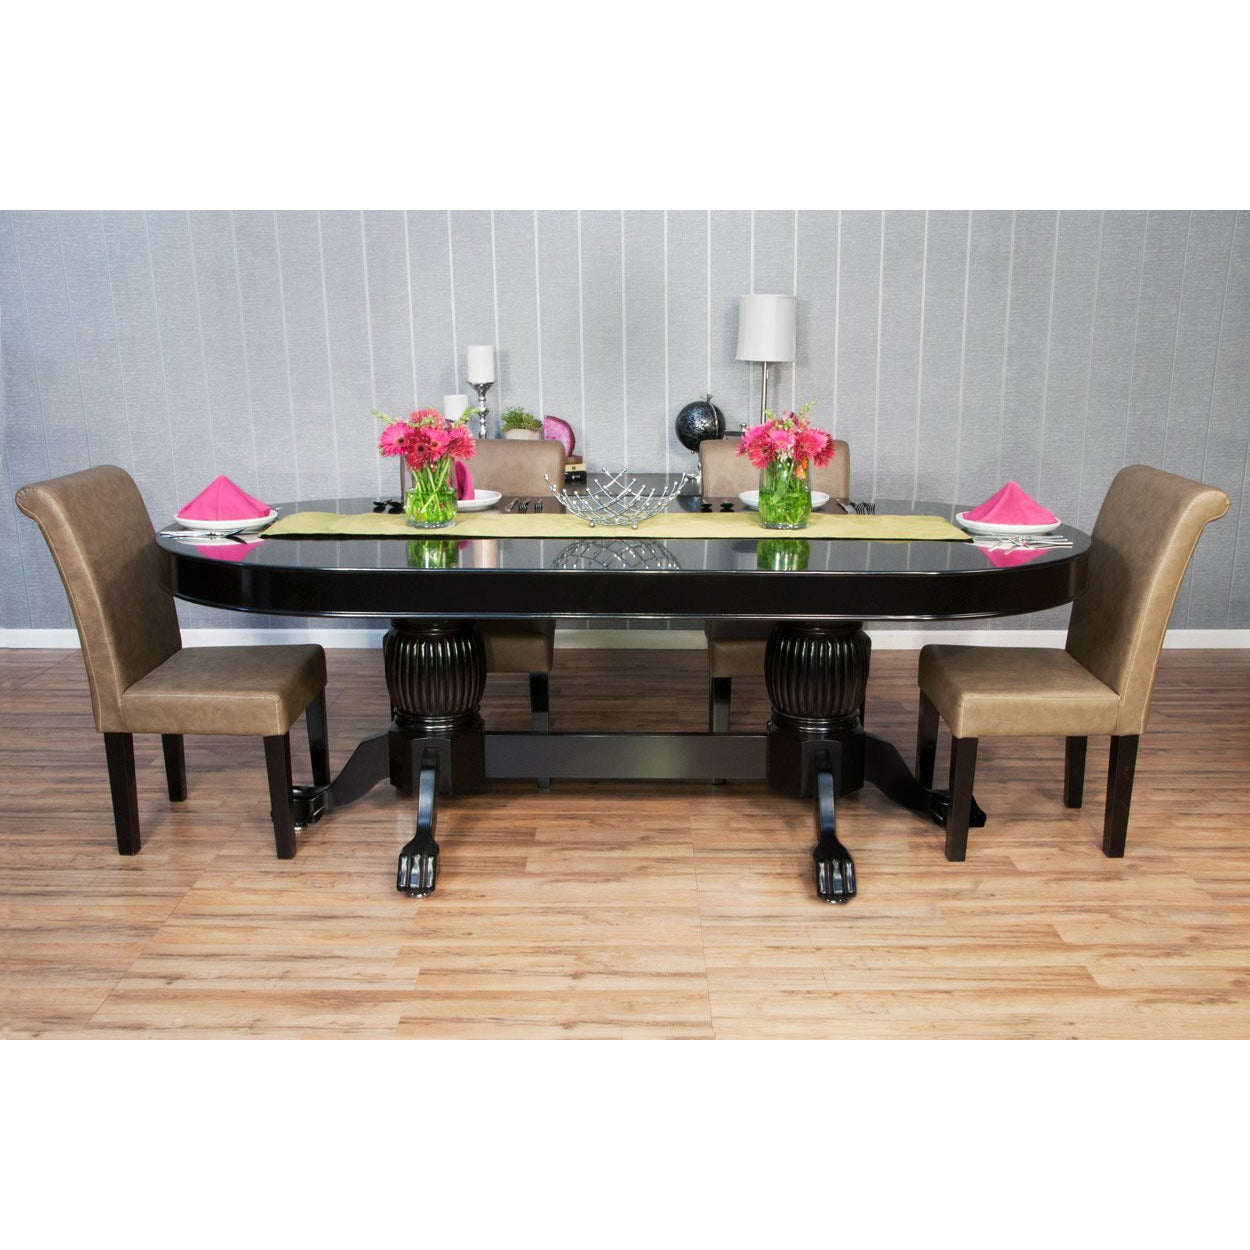 Bbo the elite poker table dinning top with chairs